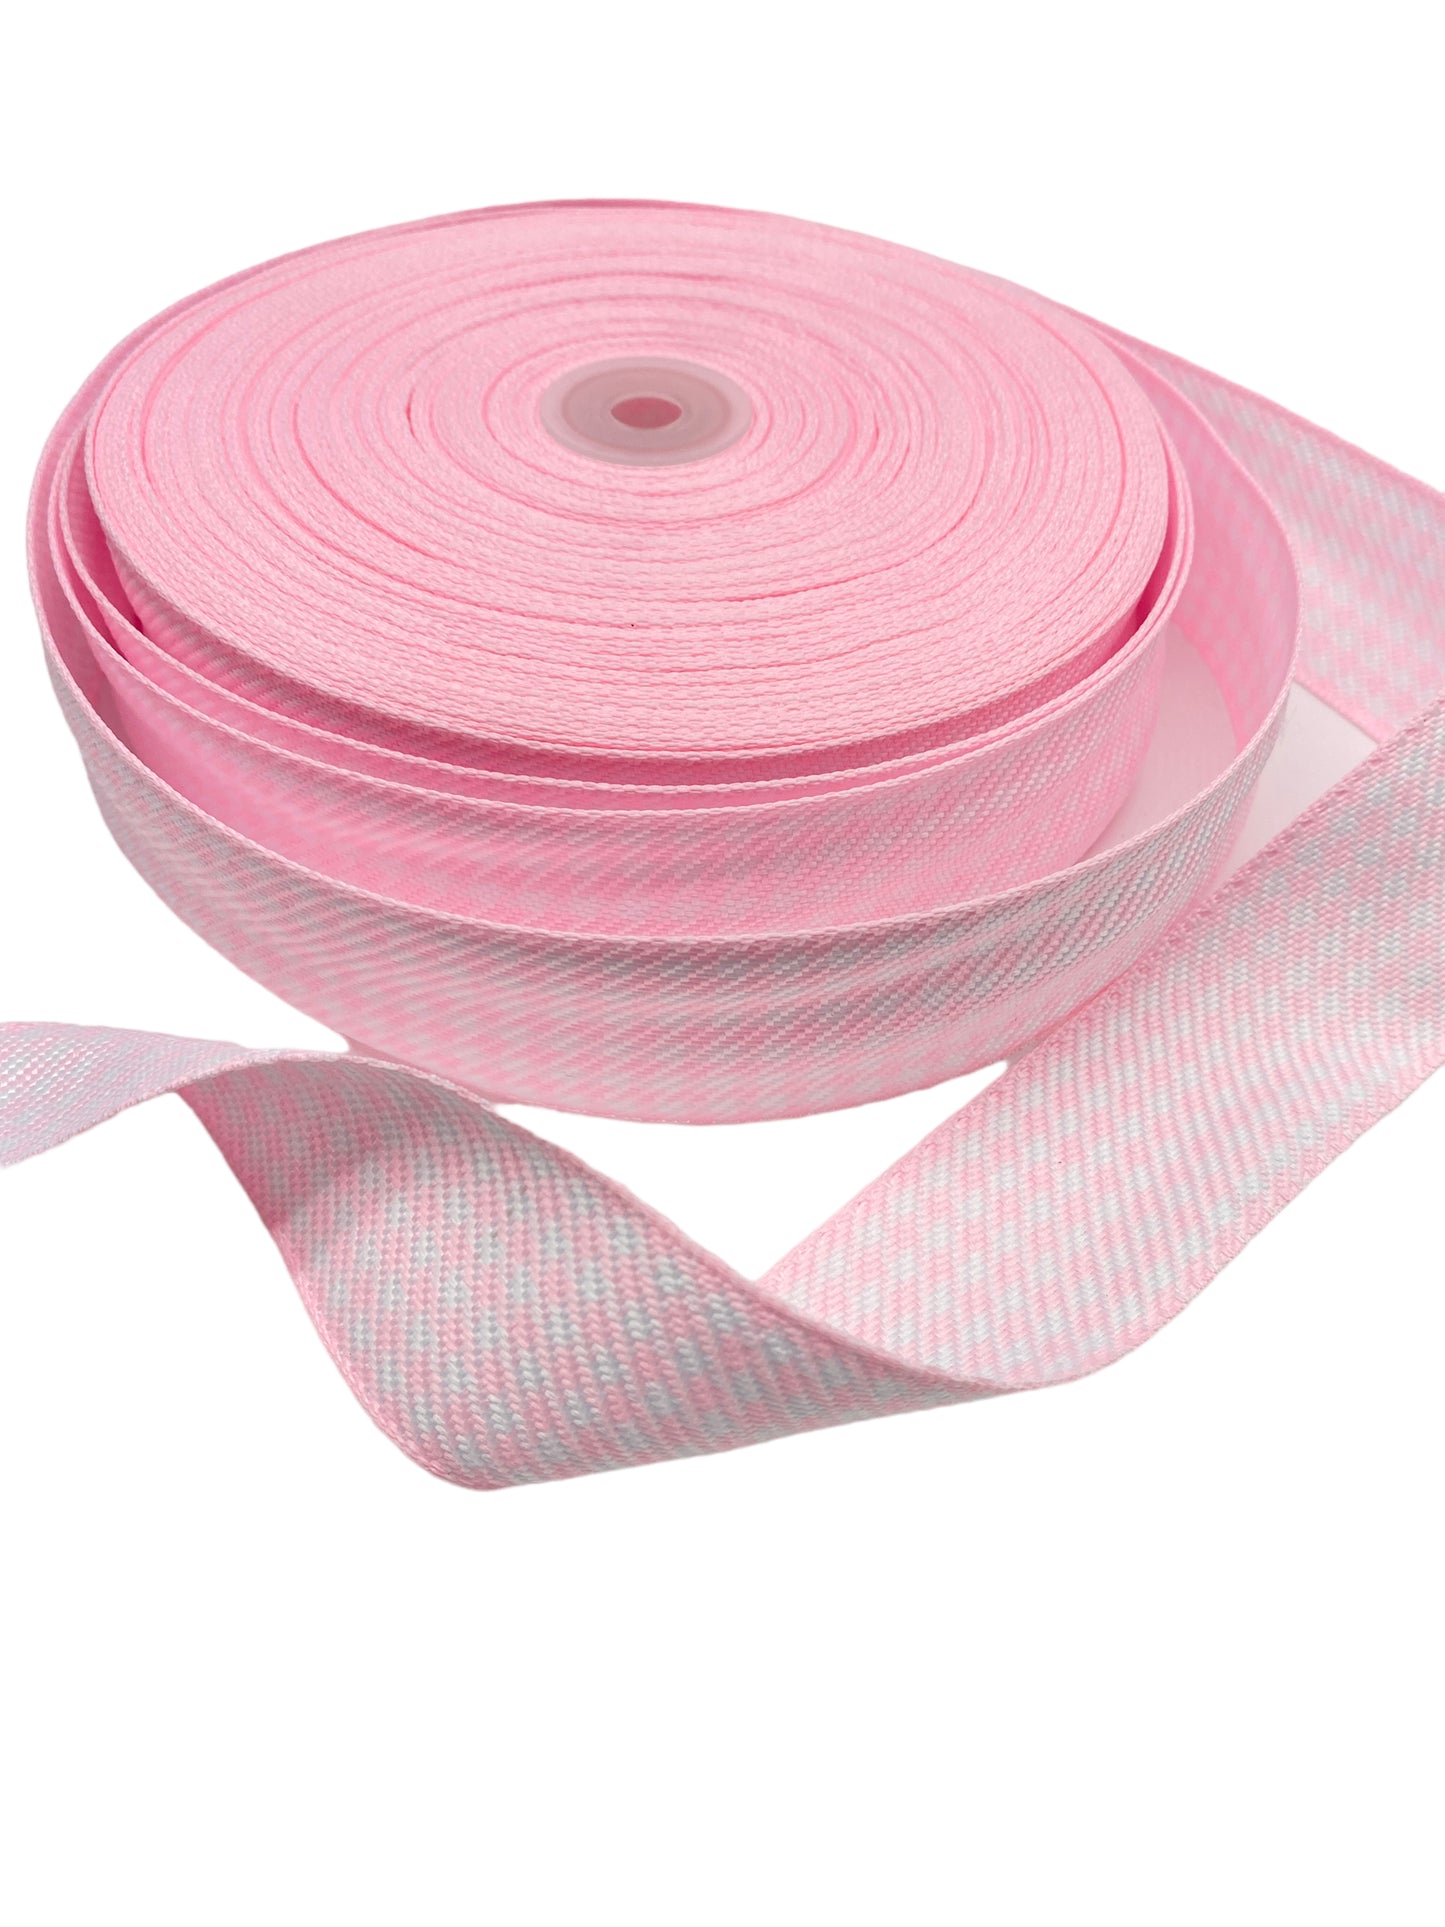 Pink and white Ribbon, 38mm/1.5 inches (3 yards)